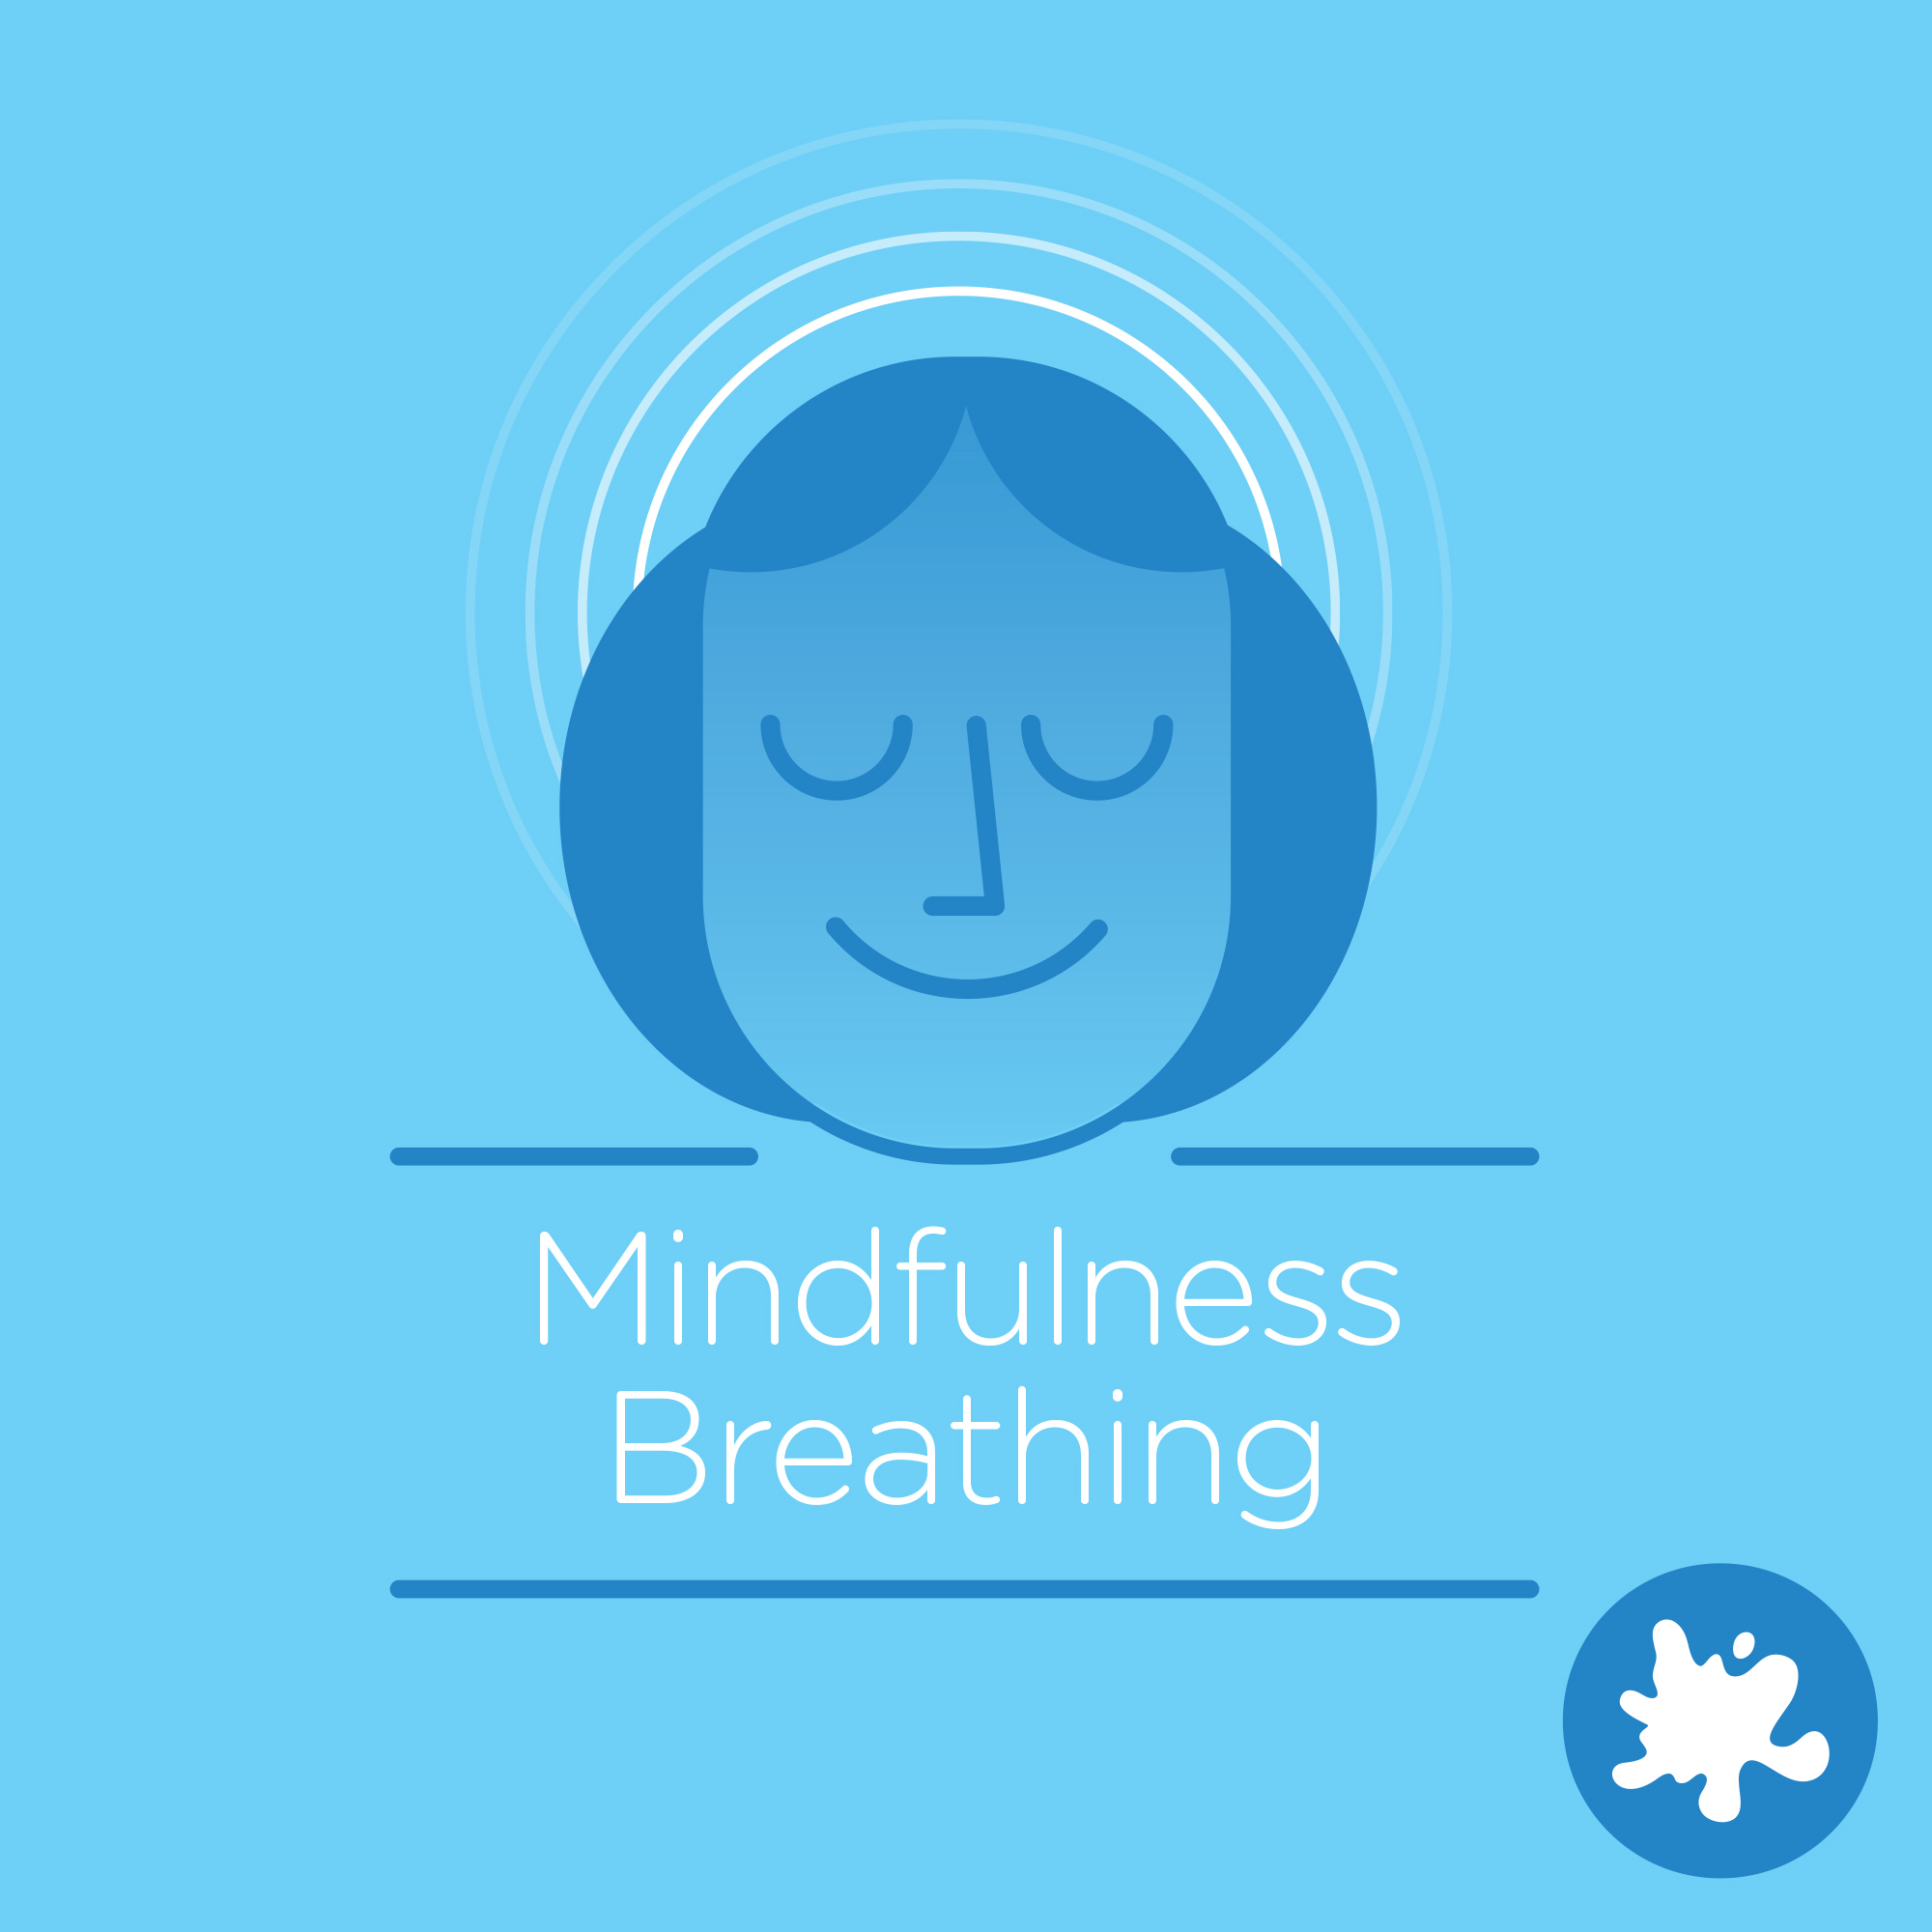 Illustration of a relaxed woman with the words "Mindfulness breathing" below.